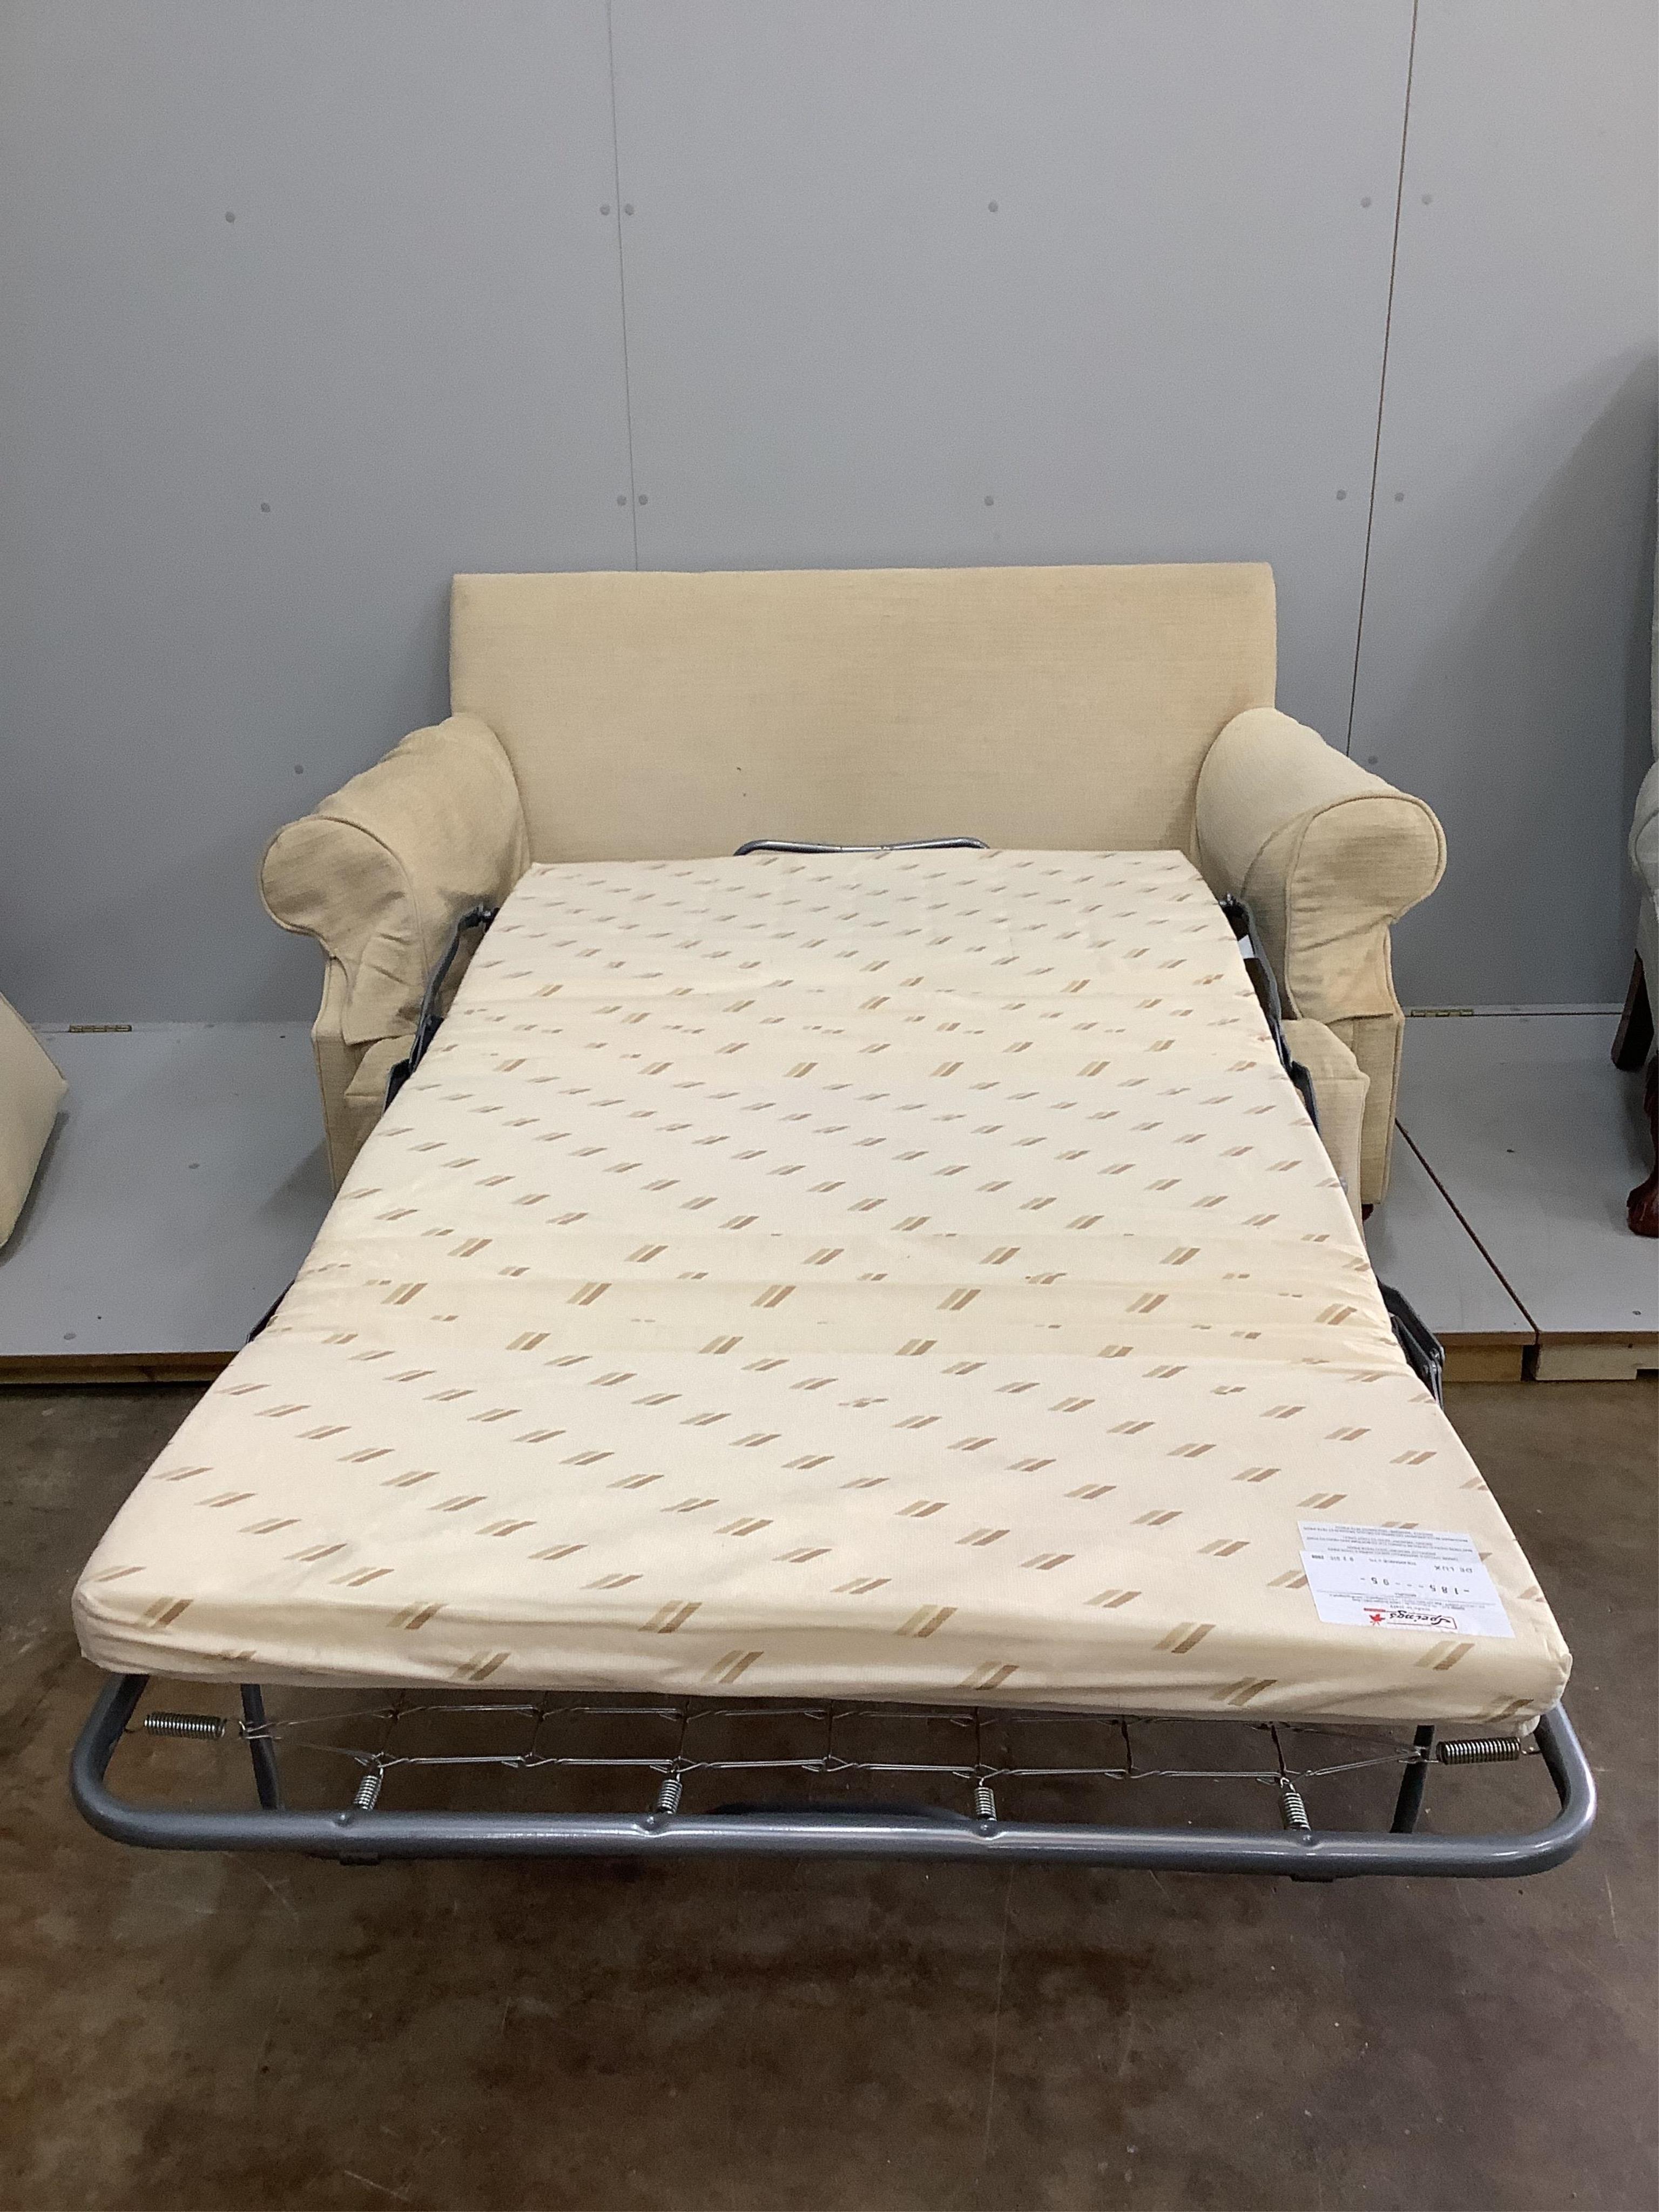 A modern two seater sofa bed by George Smith, width 150cm, depth 90cm, height 80cm. Condition - good